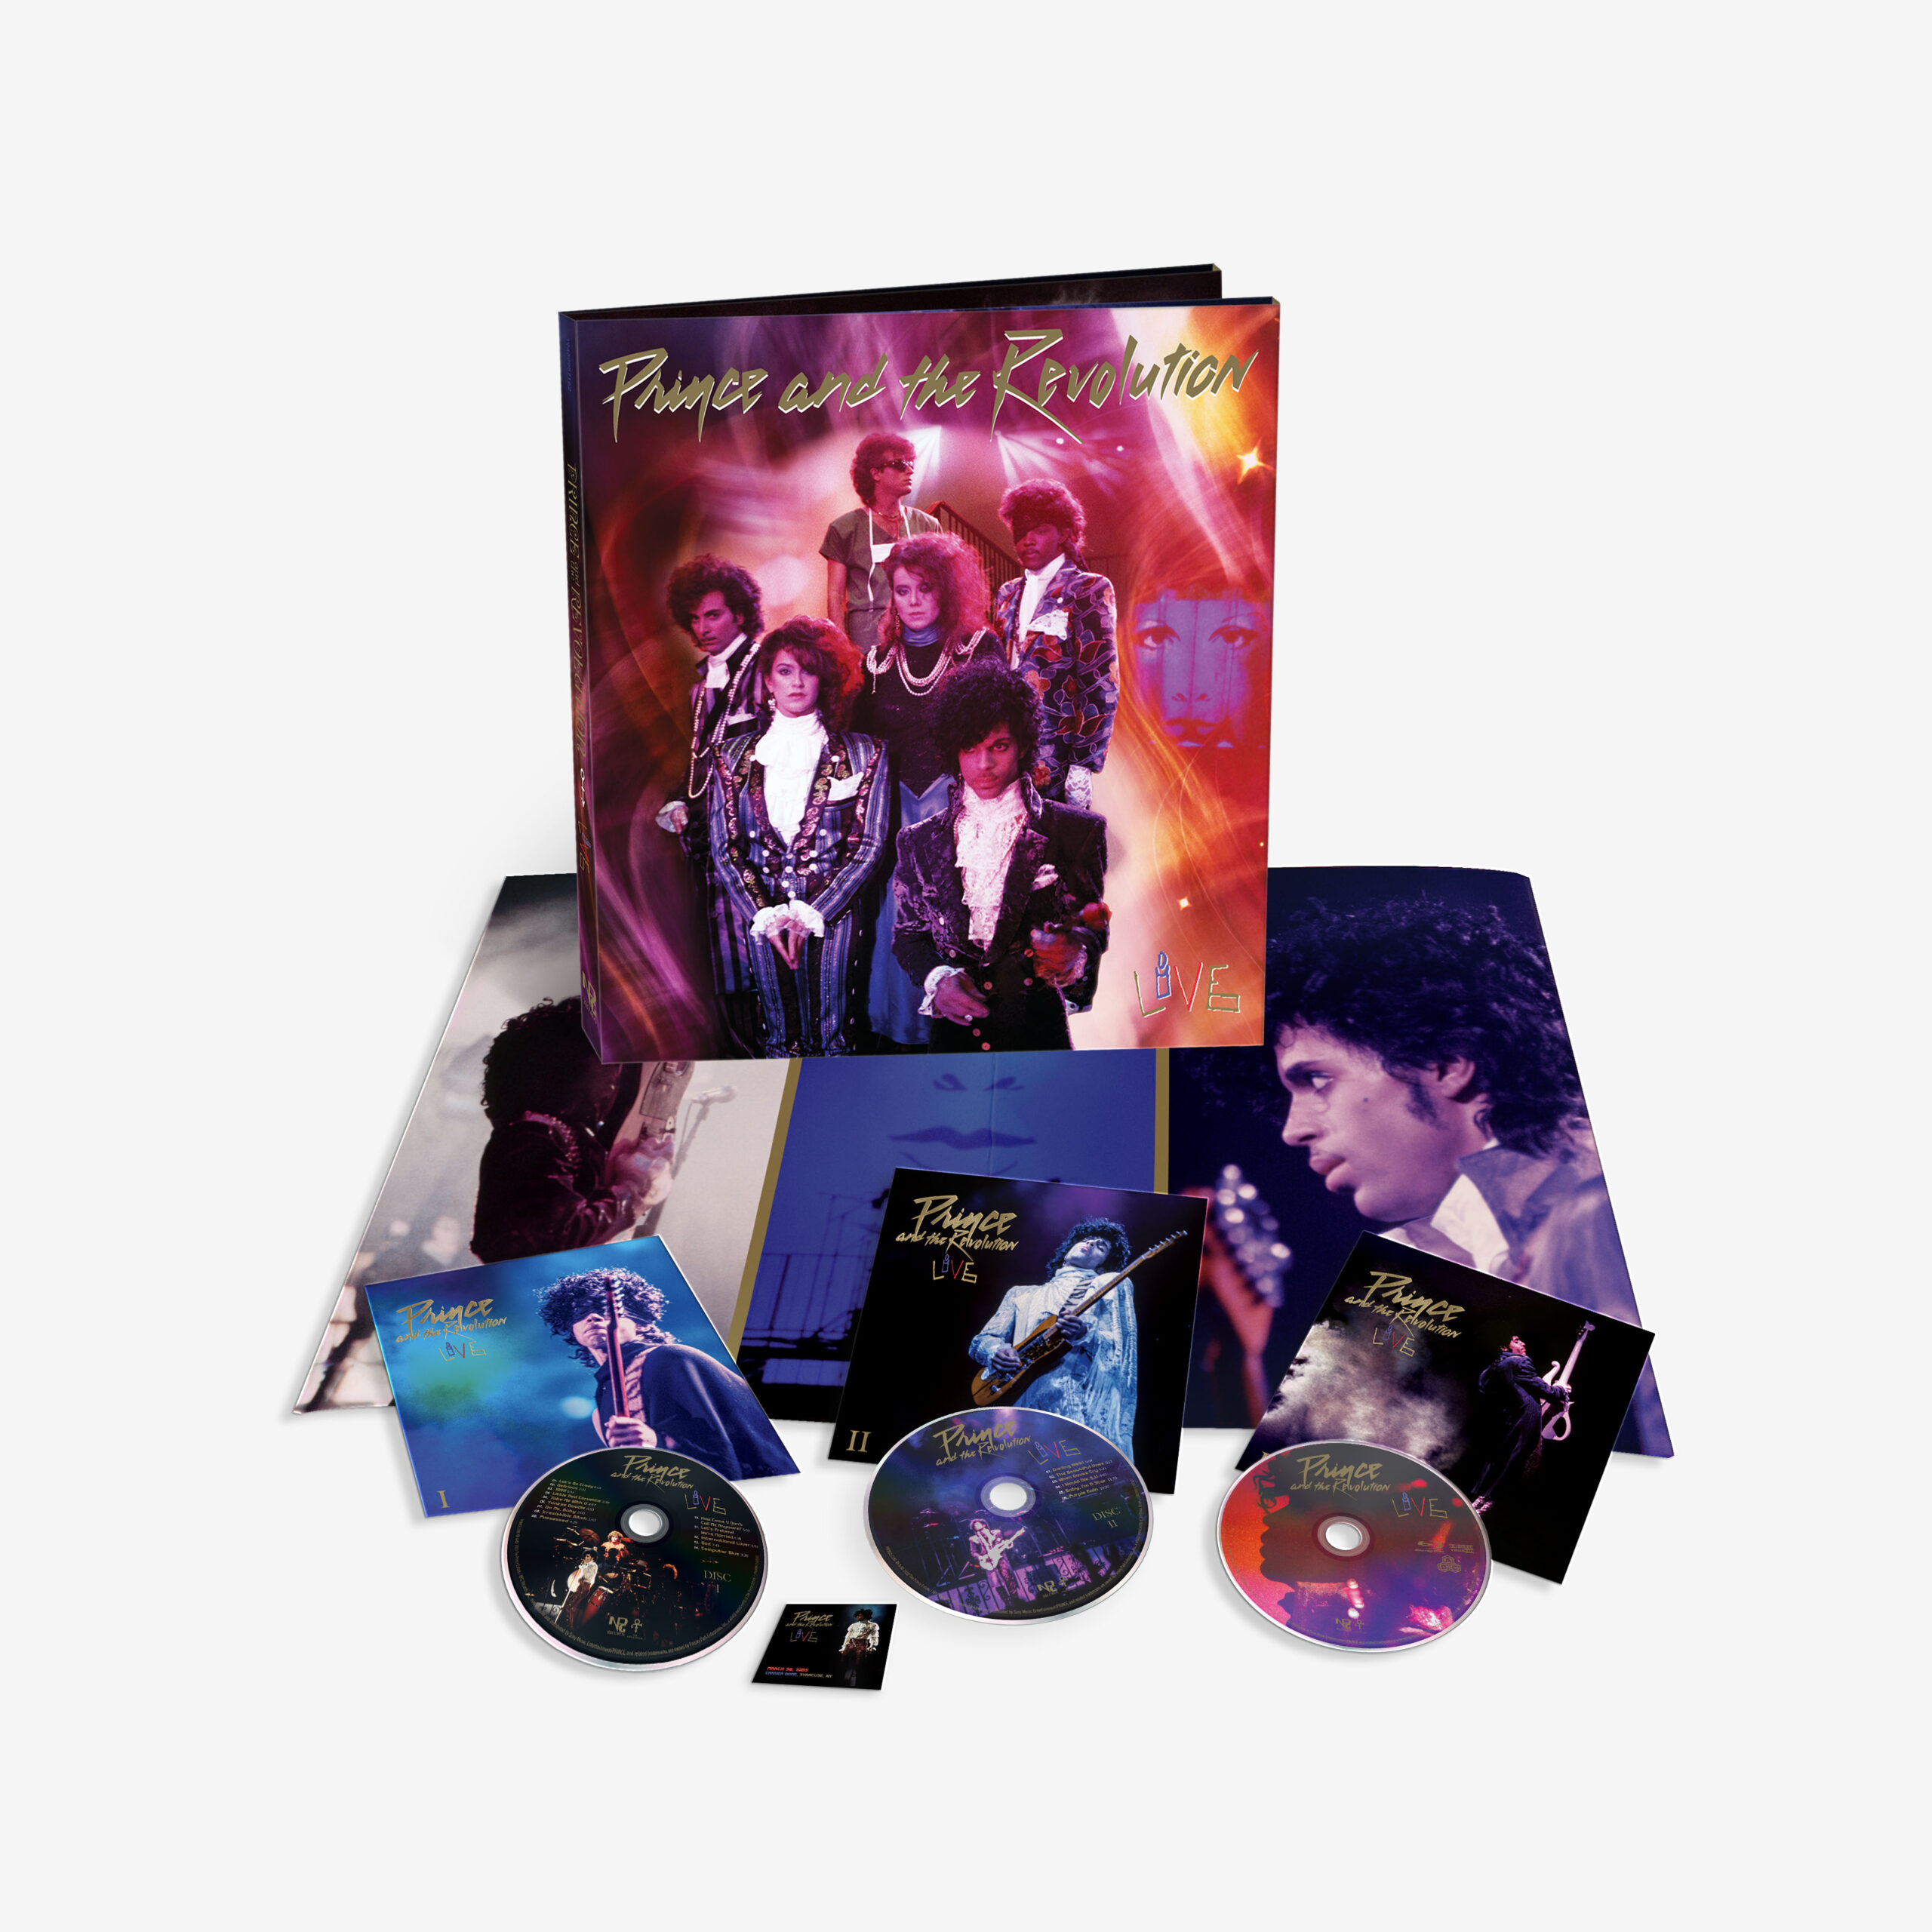 Prince and the Revolution Live / new official box set 